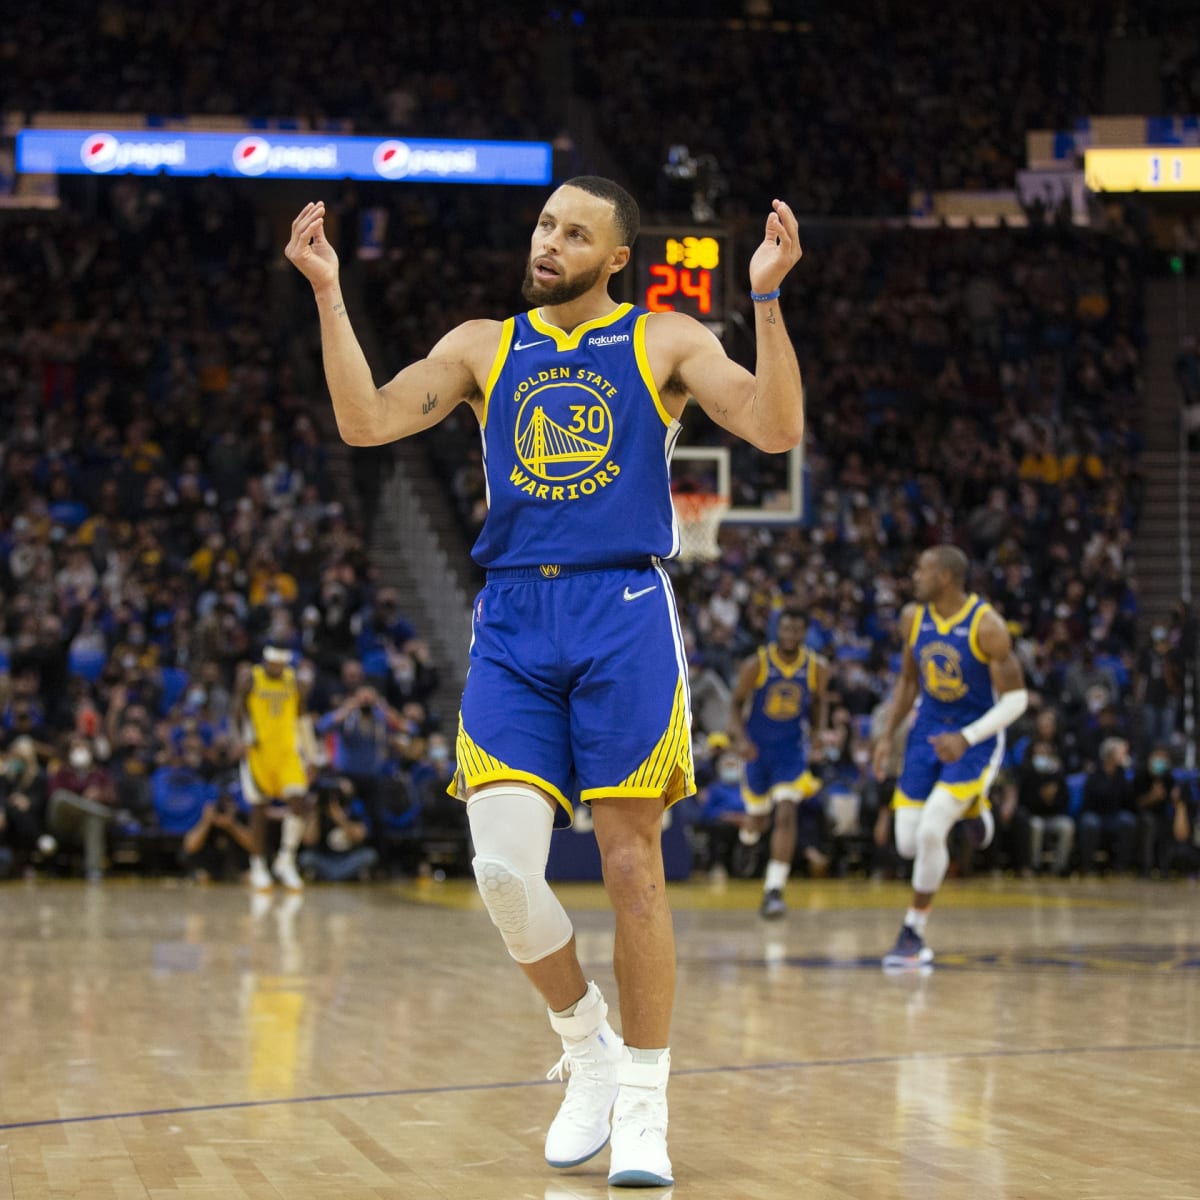 WATCH: Warriors star Steph Curry drops savage 'light the beam' reaction  after ending Kings' season in style